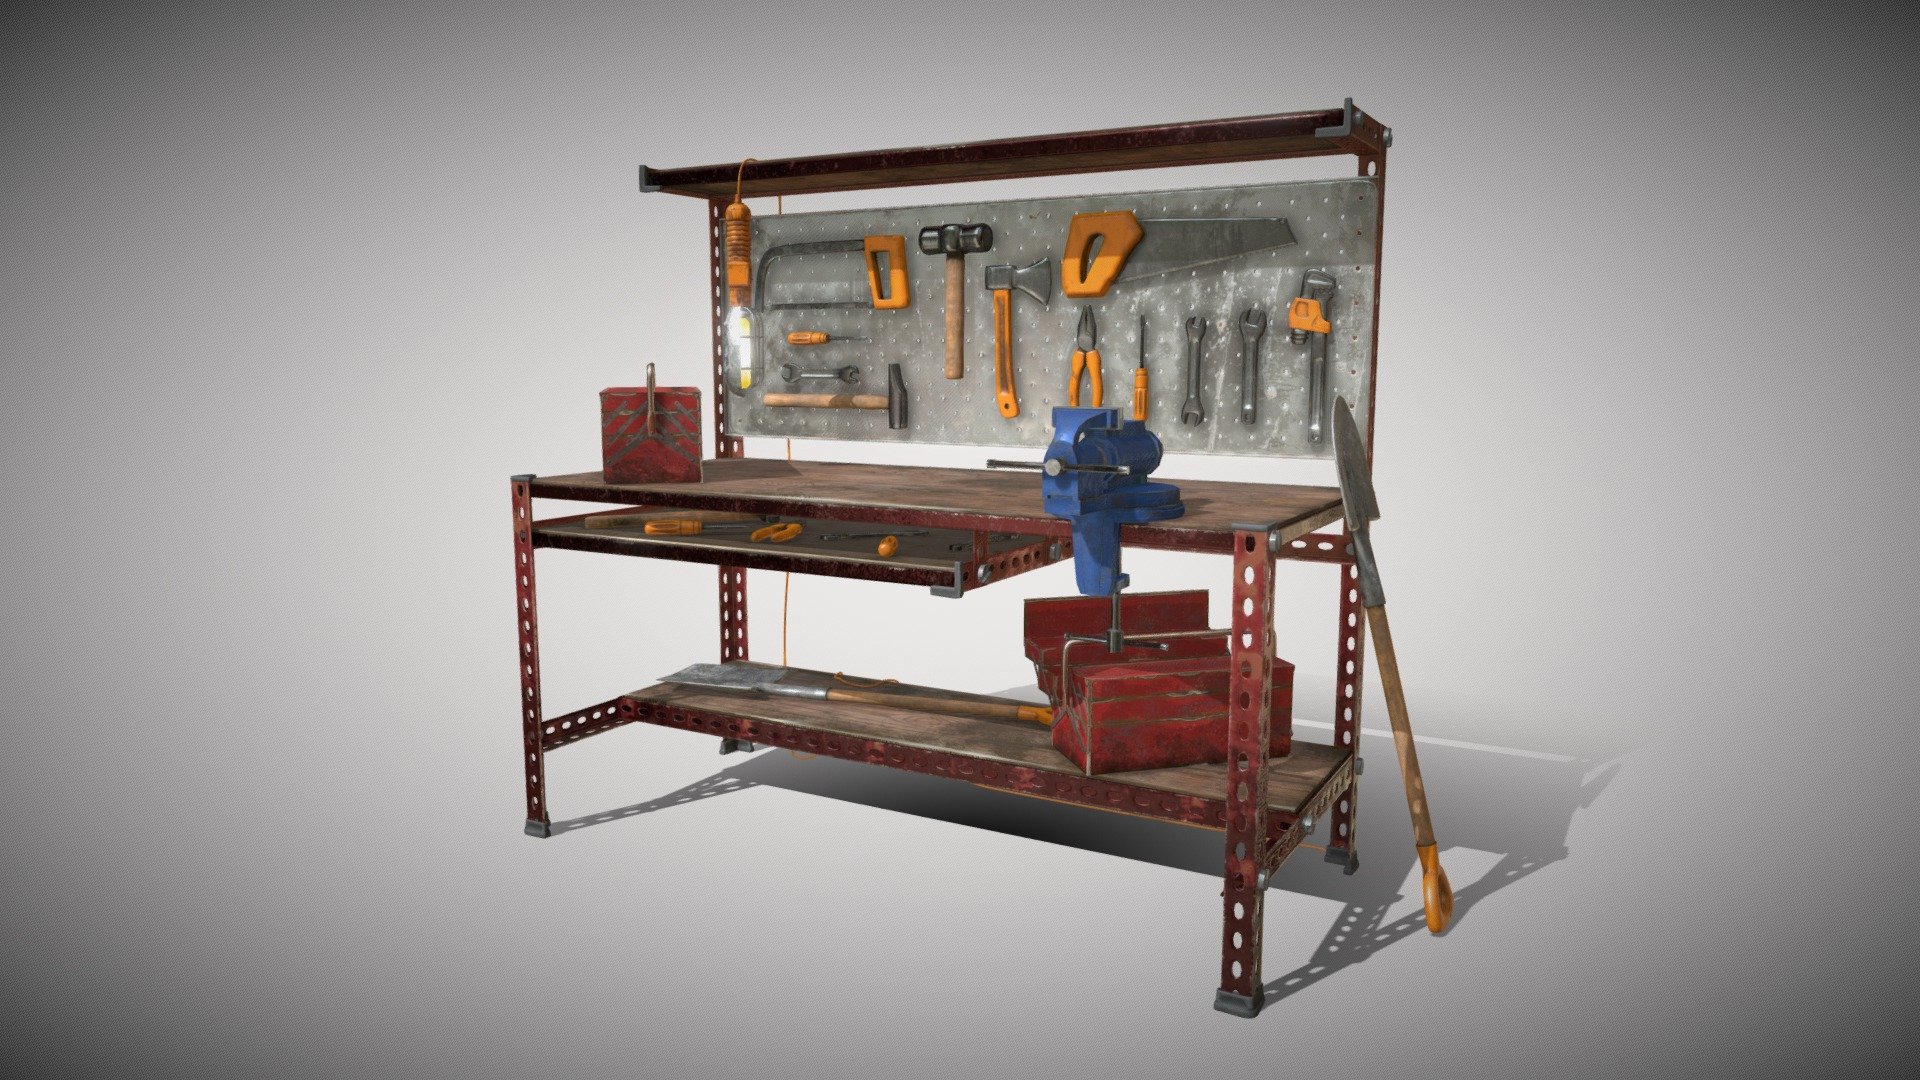 Here is this workbench with diferent tools and gadgets, hope you like it.
You can also purchase for the vise individually on my products, feel free to check them all.

-UDIMs

-2K textures

-5 materials

-No pluggins

-FBX, OBJ and blend file

-Textures included: Base color, metal, roughness, normal, bump



 - Workbench with tools - Buy Royalty Free 3D model by el_cerilla 3d model